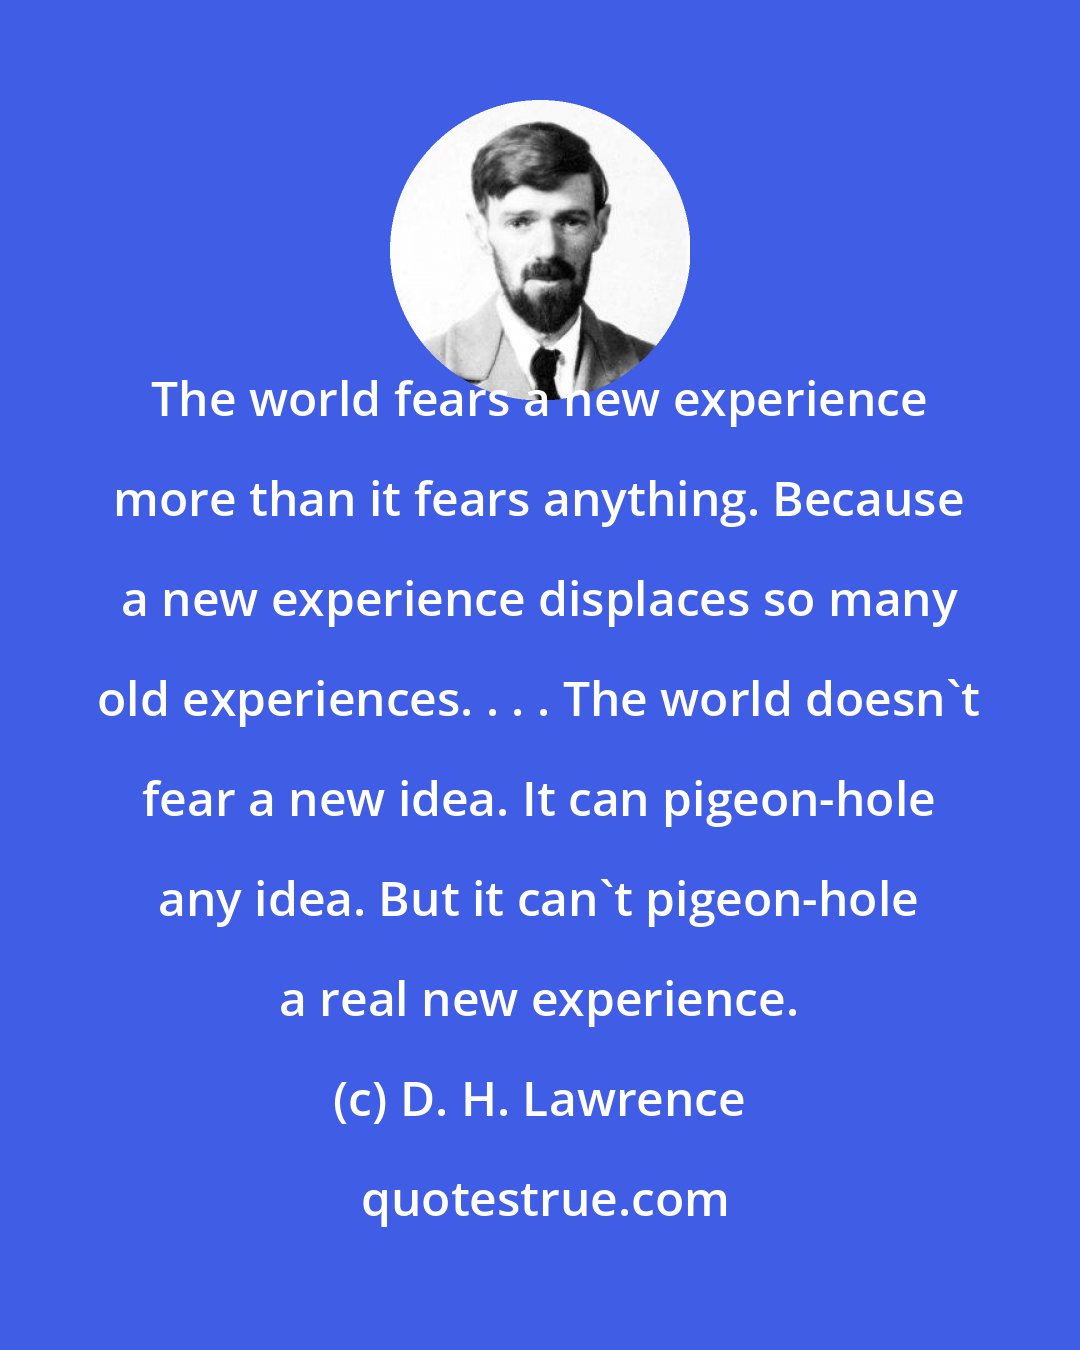 D. H. Lawrence: The world fears a new experience more than it fears anything. Because a new experience displaces so many old experiences. . . . The world doesn't fear a new idea. It can pigeon-hole any idea. But it can't pigeon-hole a real new experience.